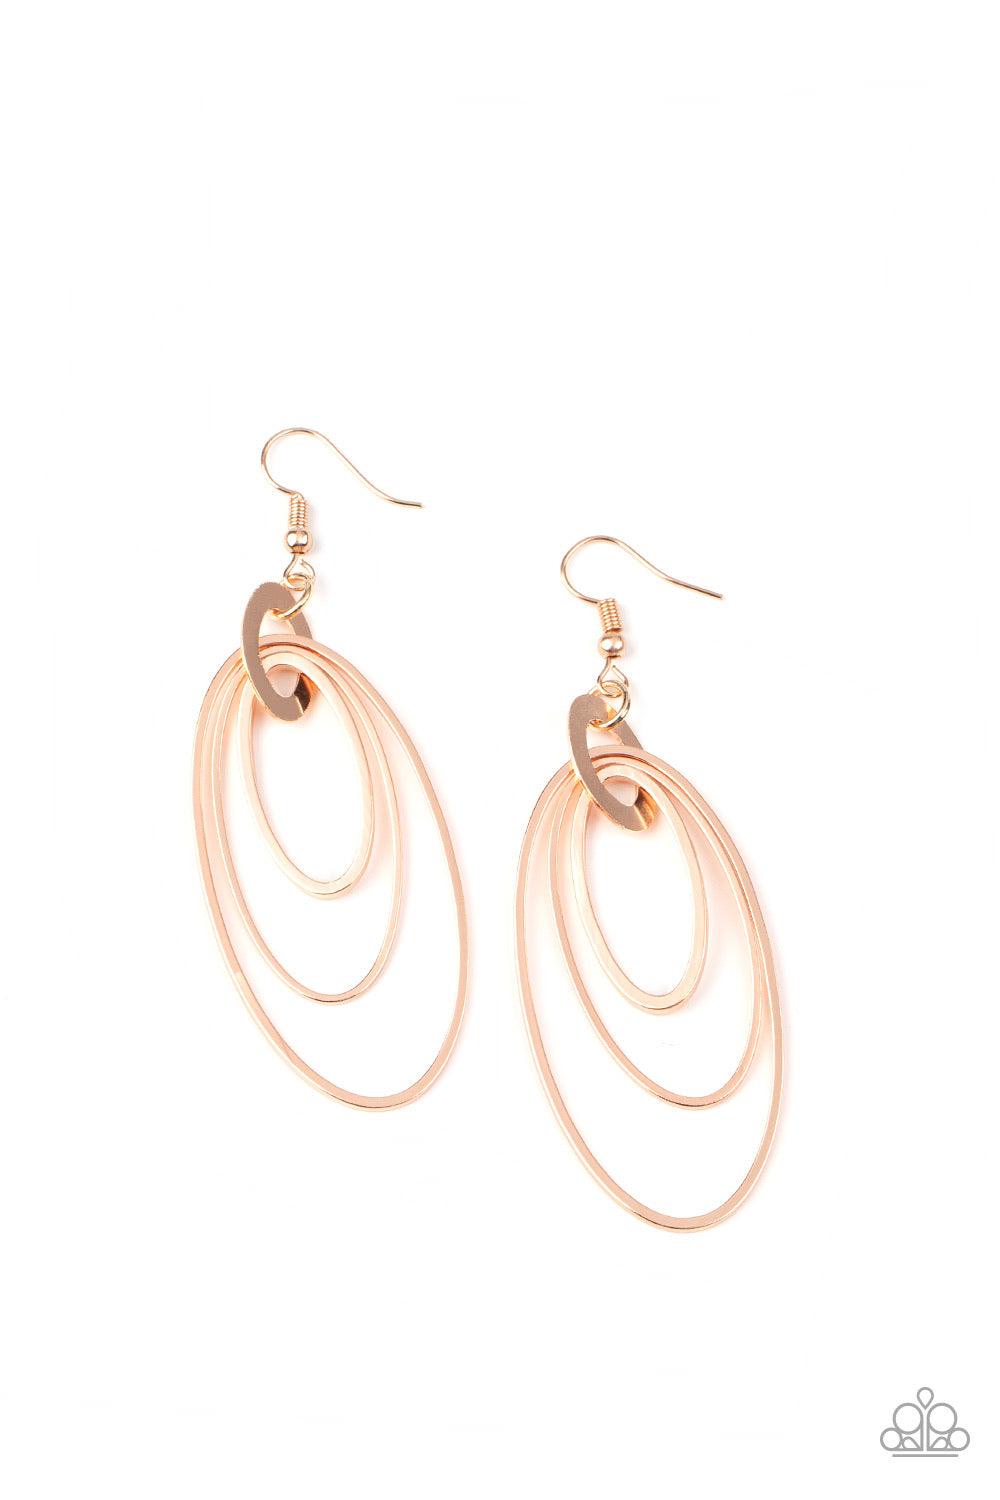 Paparazzi Accessories Shimmer Surge - Rose Gold Gradually increasing in size, shiny rose gold ovals dangle from a flat oval fitting, creating a rippling fringe. Earring attaches to a standard fishhook fitting. Sold as one pair of earrings. Jewelry